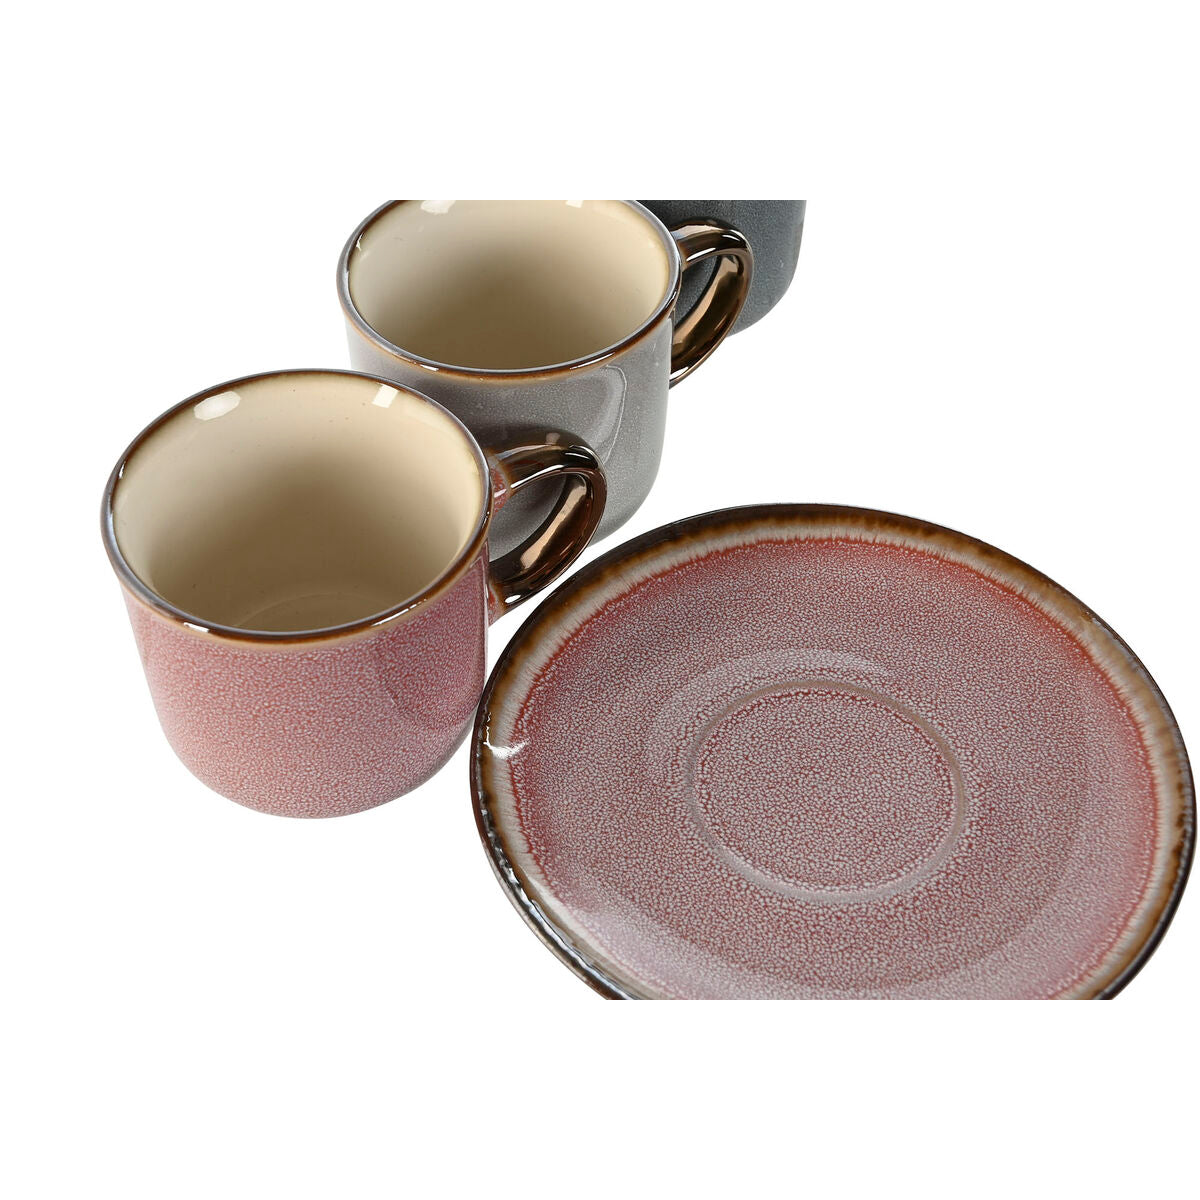 Set of 6 Cups with Plate Home ESPRIT Blue White Pink Maroon Stoneware 165 ml 14 x 14 x 2 cm